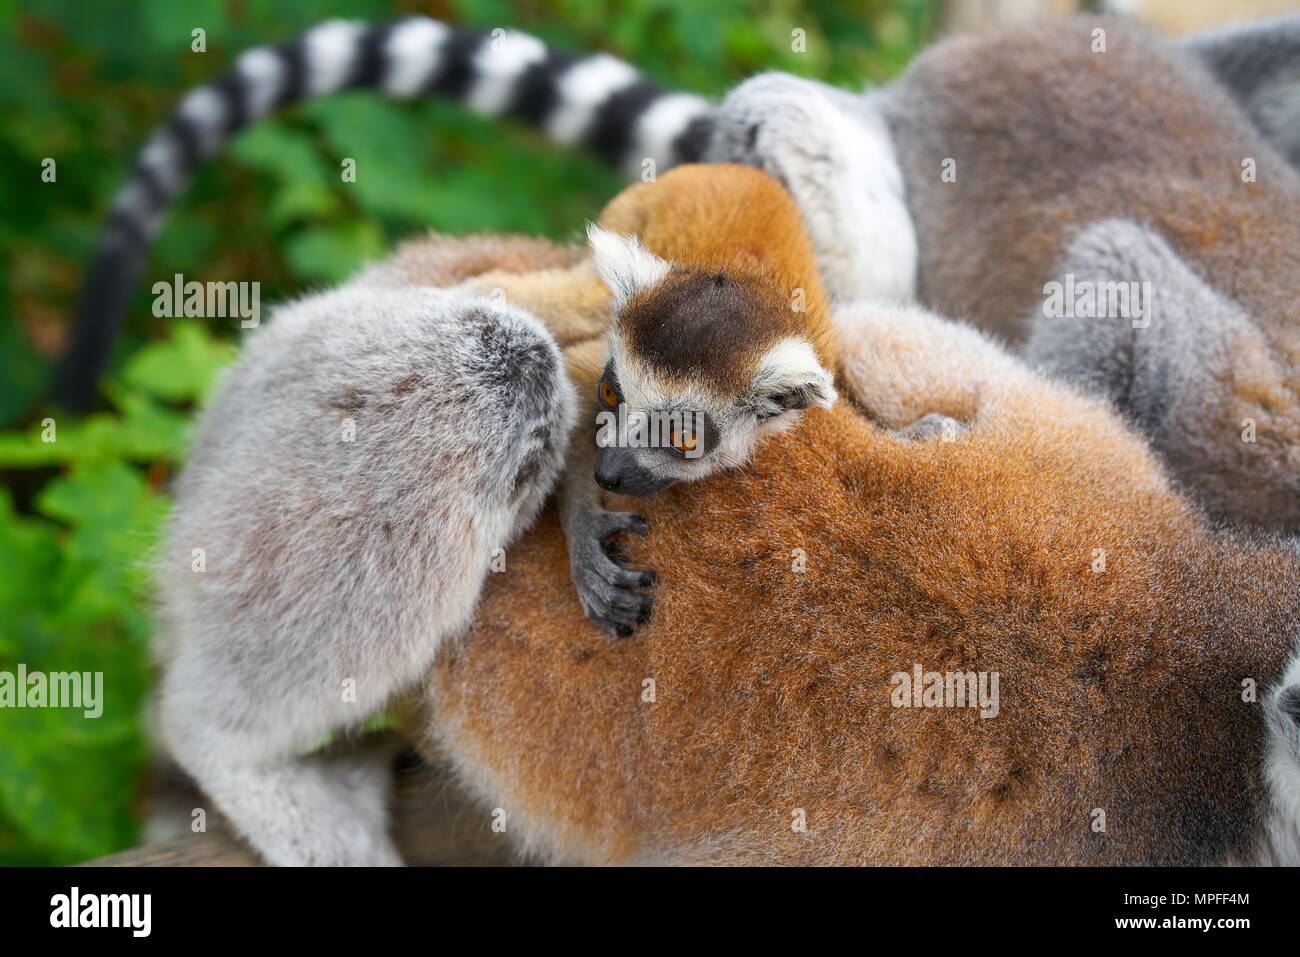 Ring tailed lemurs family outdoor forest Stock Photo